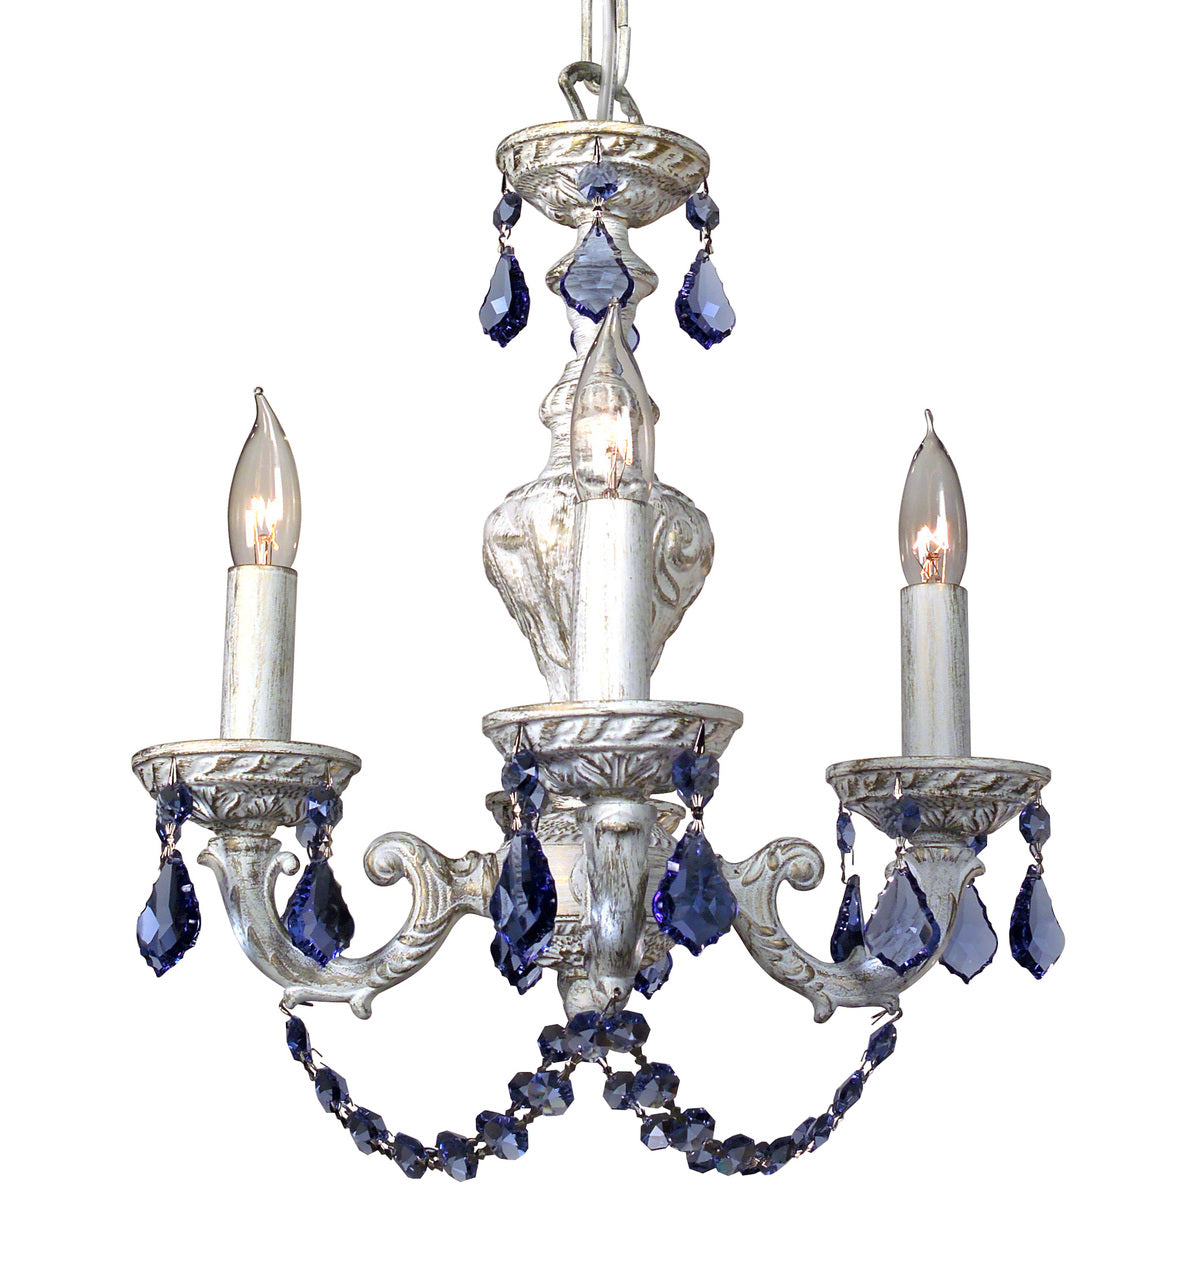 Classic Lighting 8335 AW SMK Gabrielle Crystal Mini Chandelier in Antique White